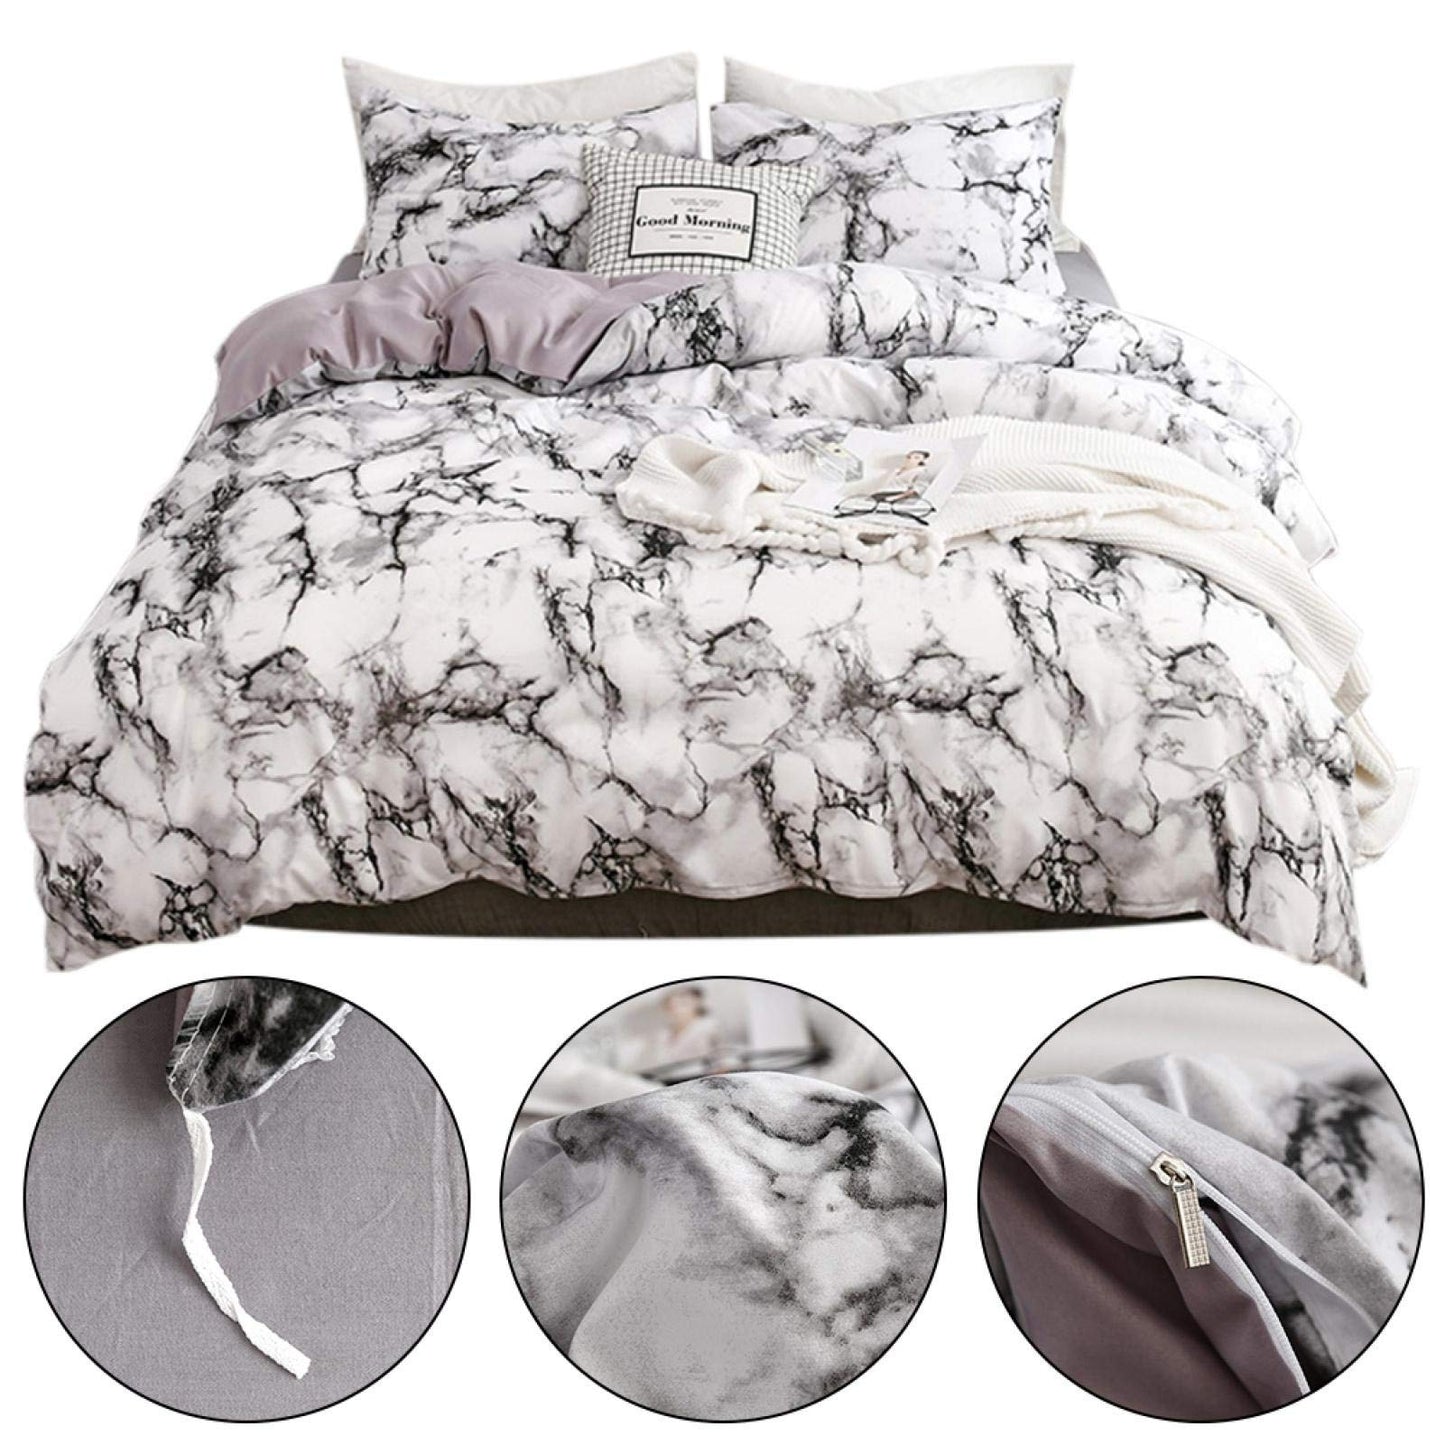 Concise Style Bedding Set Textile Bed Set No Sheets 3pcs Bedding Set Classic New Arrival Duvet Cover And Pillowcase